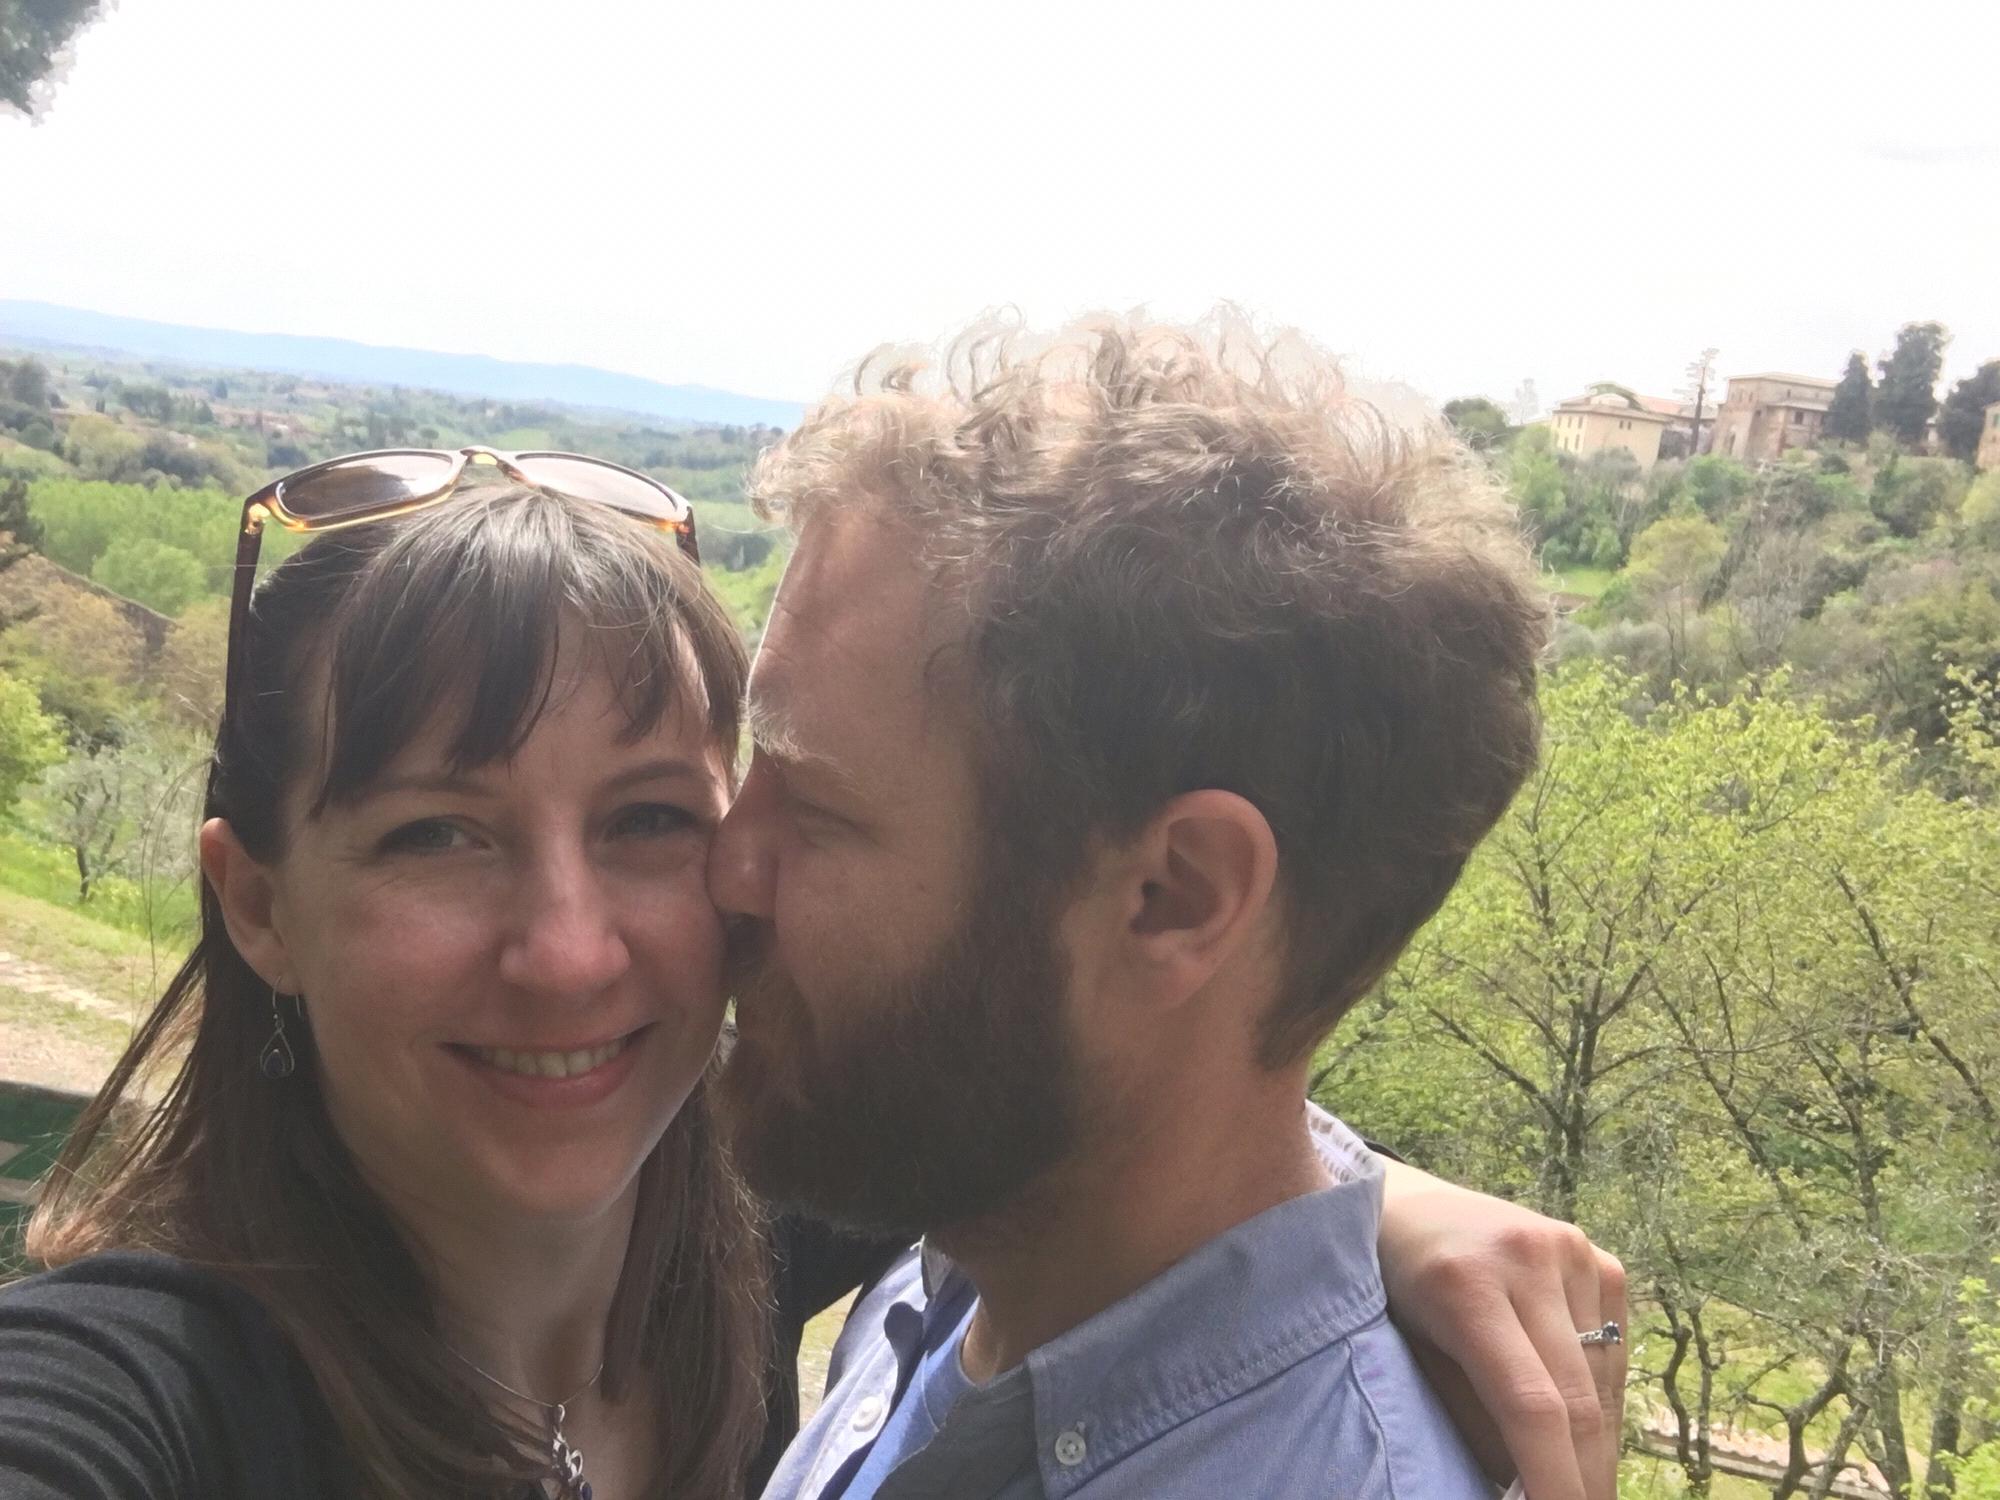 Enjoying our new engagement in Siena, Italy